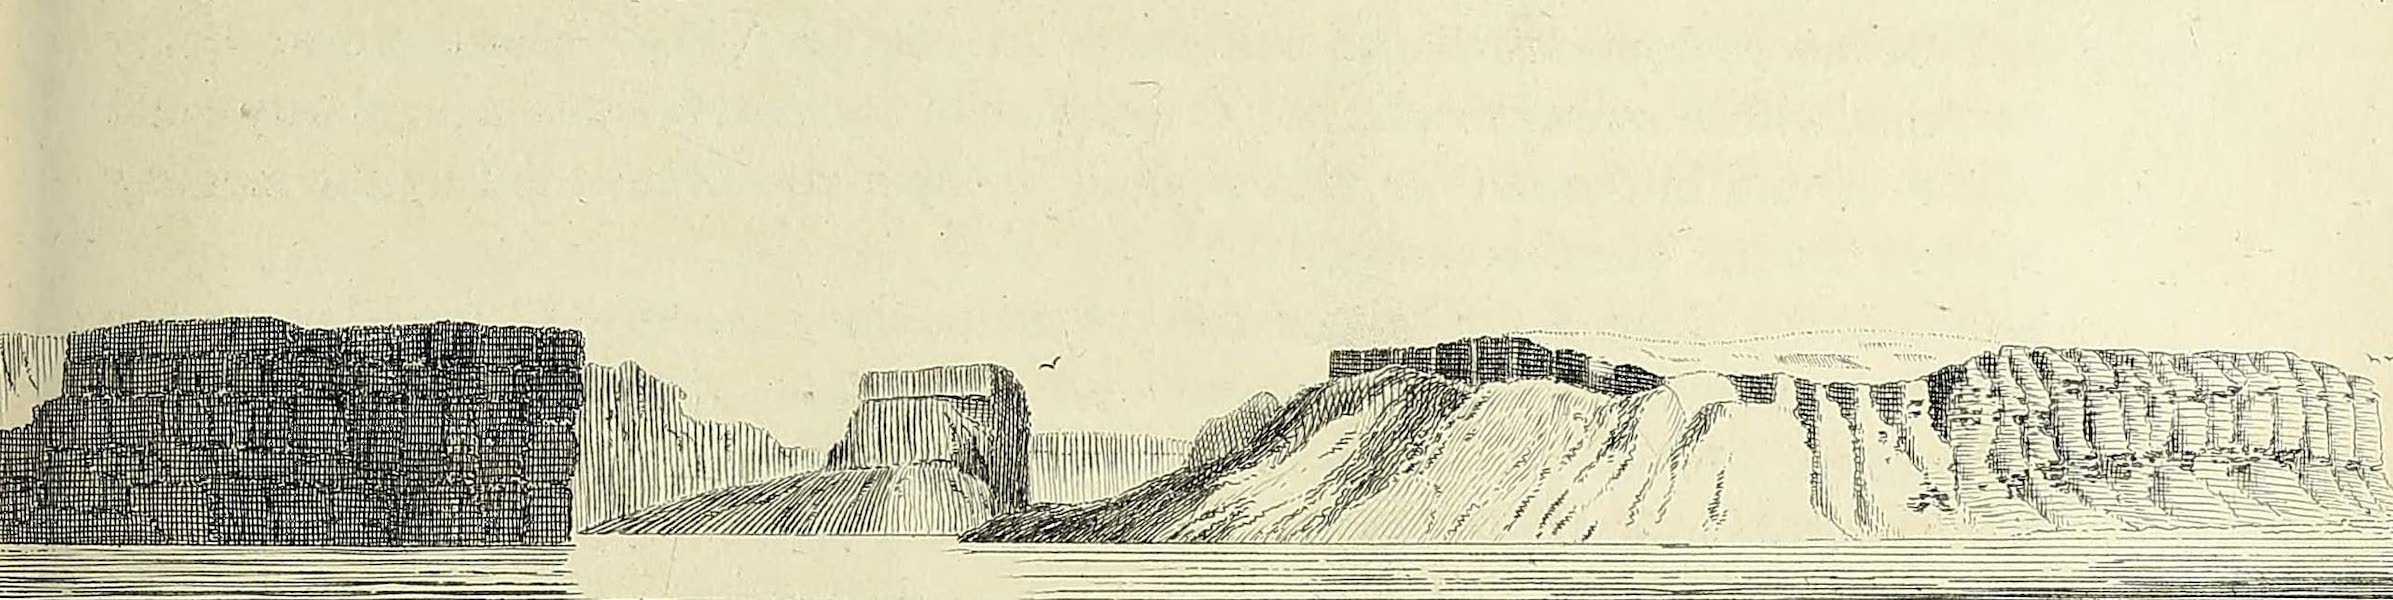 Journal of a Voyage for the Discovery of a North-West Passage - Caswall's Tower, bearing N. 36' 16 E. seen through Gascoyne's Inlet to Cape Ricketts (1821)